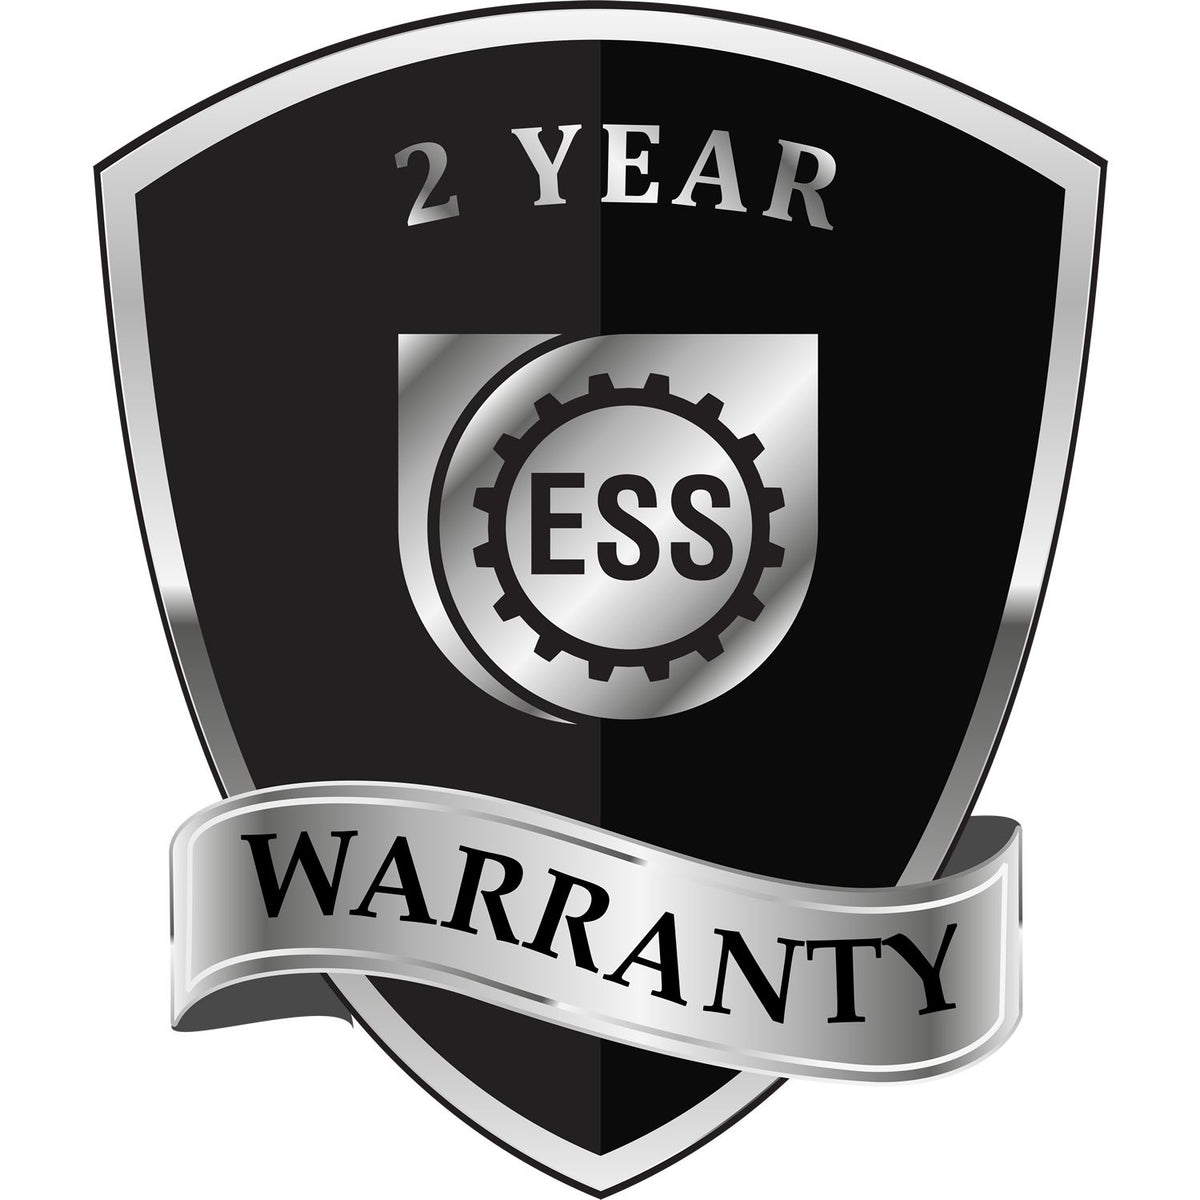 A badge or emblem showing a warranty icon for the Extended Long Reach Washington Architect Seal Embosser